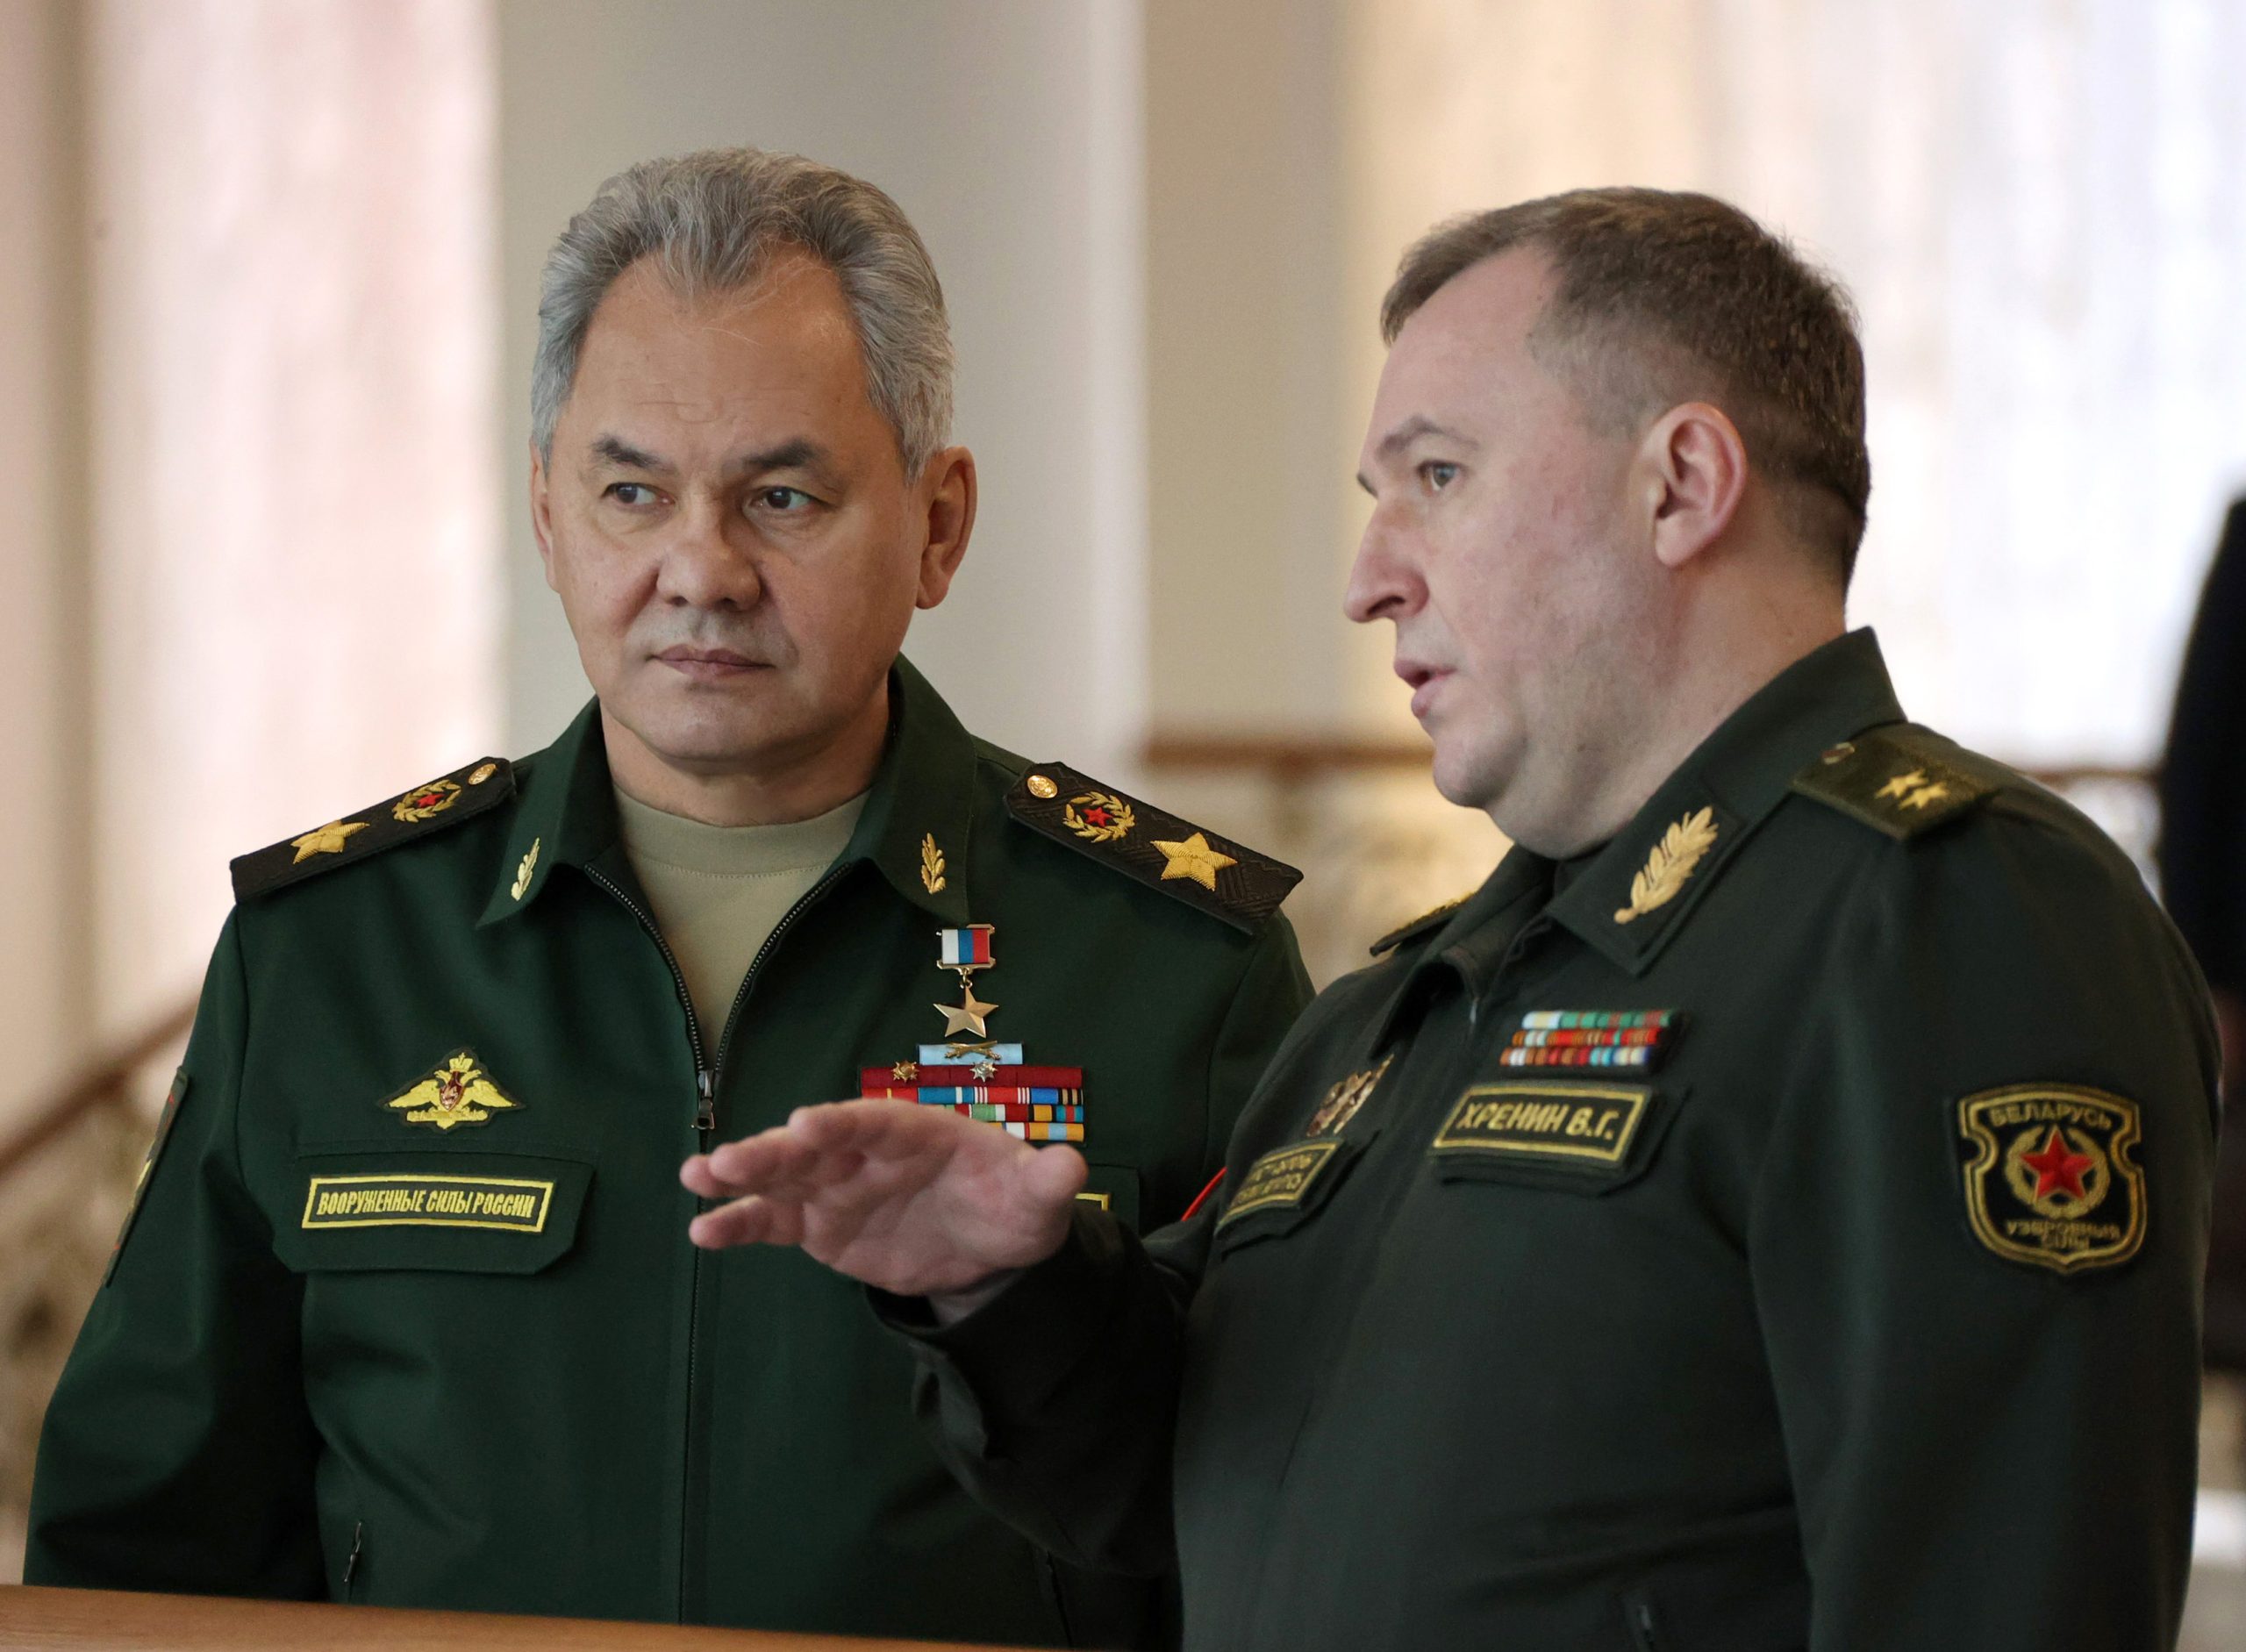 Photo: Russian Defense Minister Sergei Shoigu (L) arrives in Minsk, Belarus, on Feb 3, 2022 where he will inspect the progress of the joint military exercises. Russia is massing nuclear-capable missiles along with 30,000 troops in Belarus, Jens Stoltenberg, NATO general secretary warns, amid fears of a huge refugee crisis if Ukraine is invaded. Credit: EYEPRESS MEDIA via Reuters